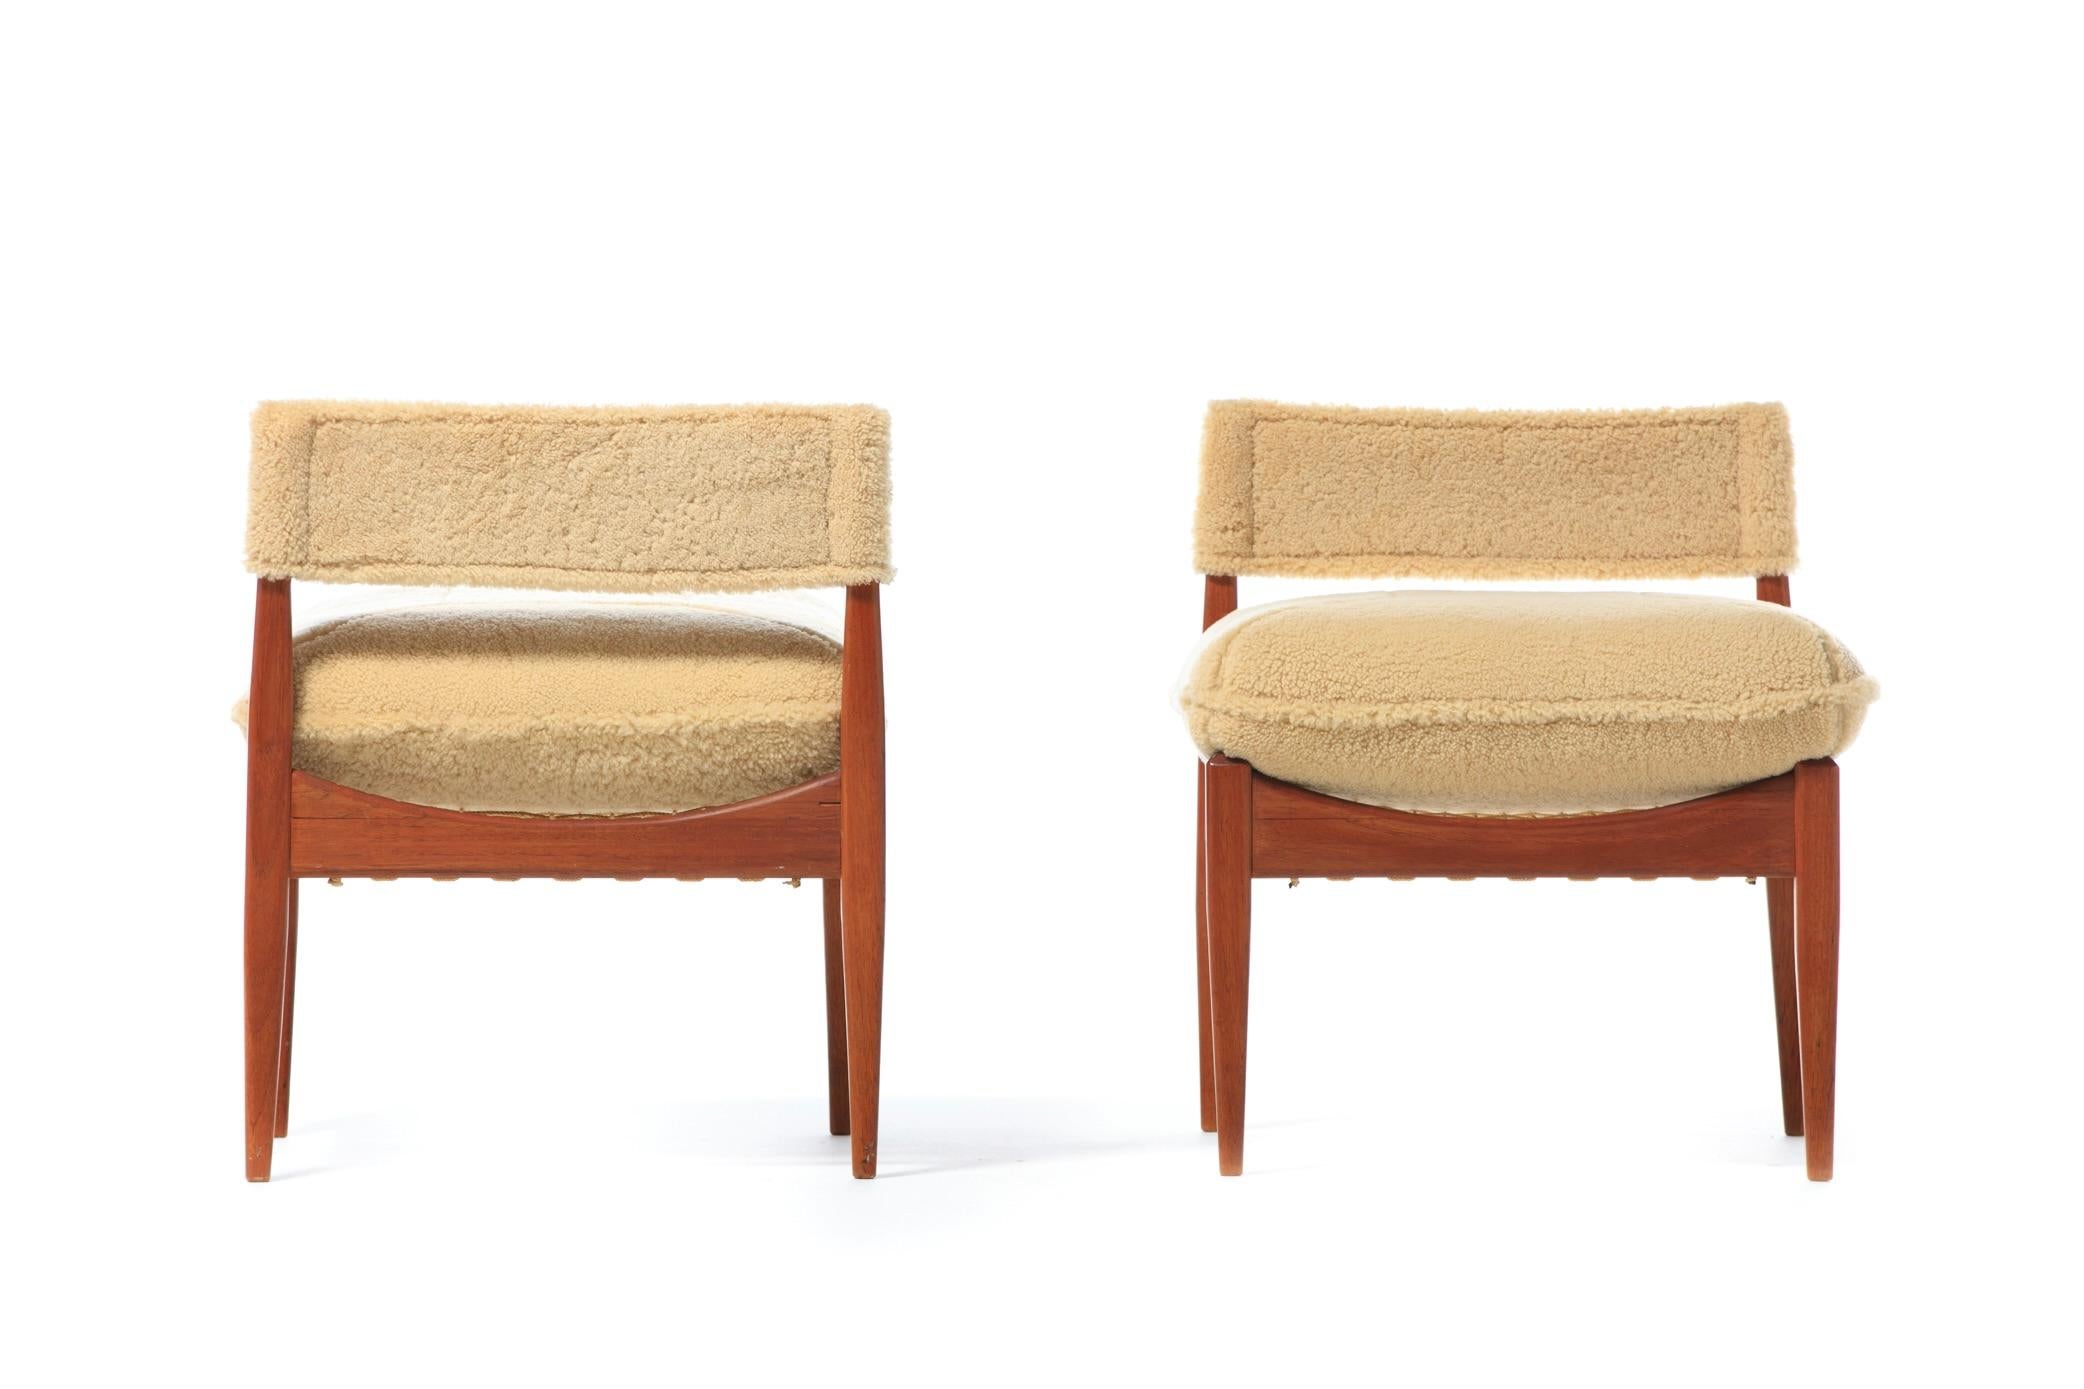 Scandinavian Modern Danish Modern Pair of Kristian Vedel Style Lounge Chairs in Palomino Shearling For Sale